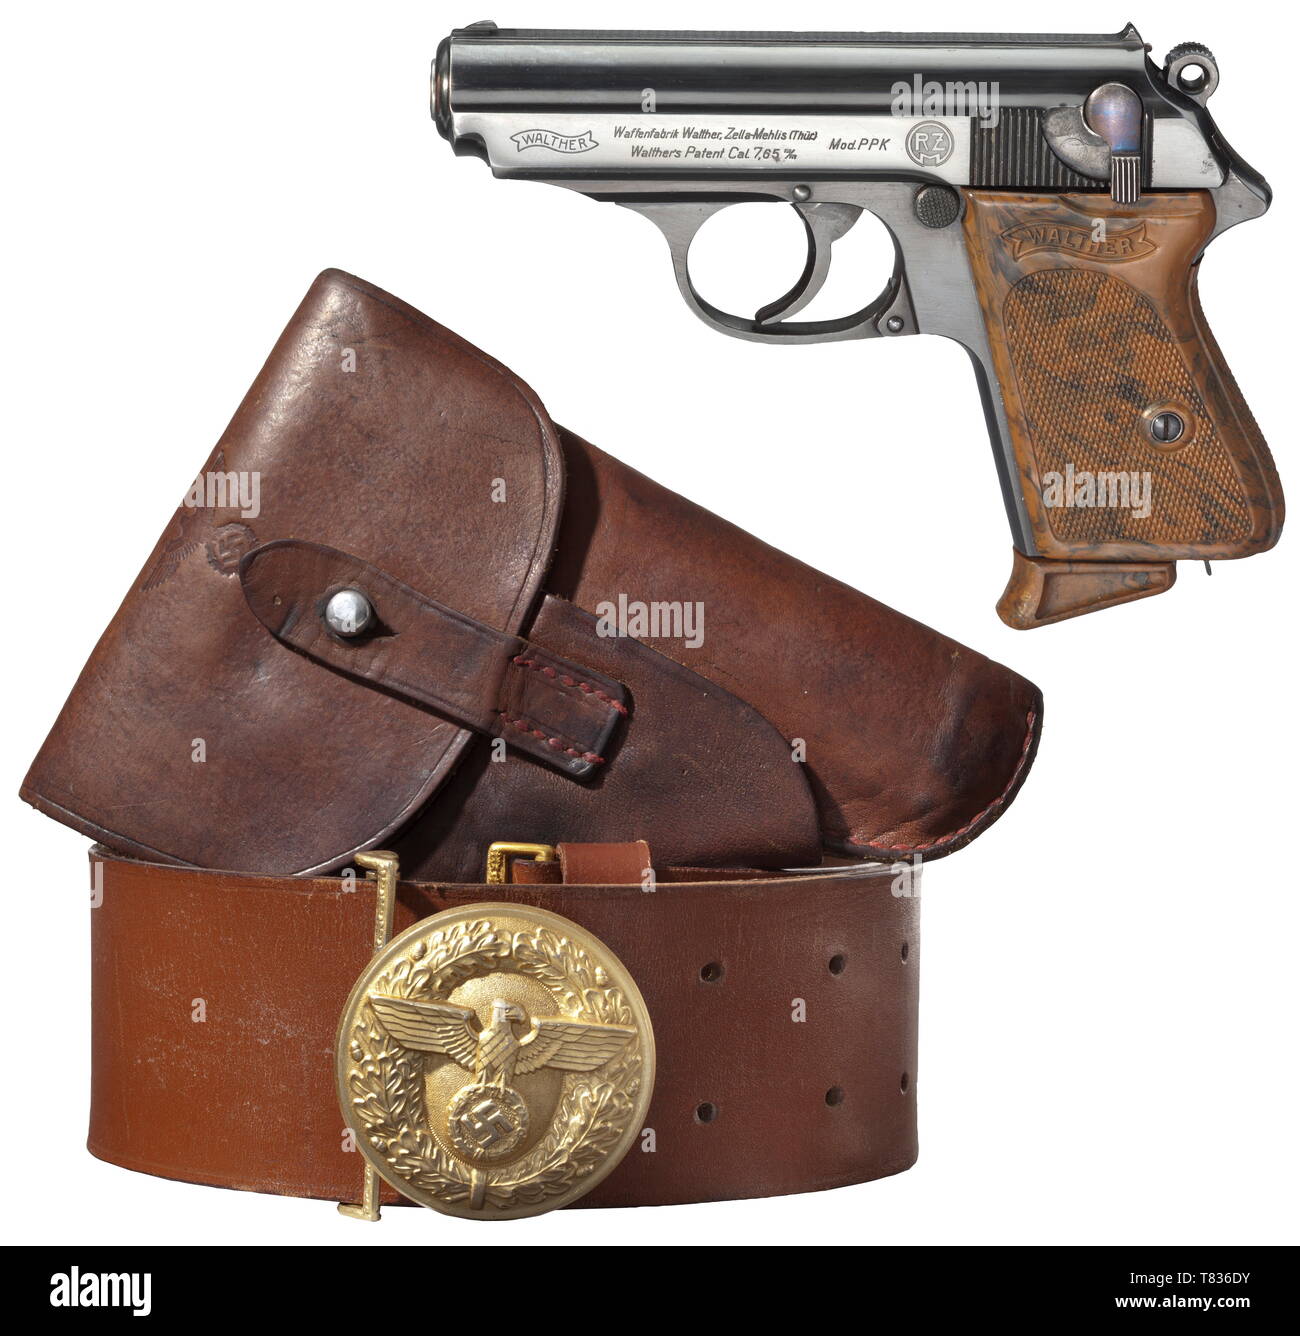 A Walther PPK ZM, PL - 'Ehrenwaffe des Politischen Leiters', with PL holster and belt Circa 1935, cal. 7.65 mm, no. 831502. Bright bore. Proof mark crown/N. 90ø safety. On the left of slide standard inscription diminished and moved to the left, adjacent on the right RZM (Reichszeugmeisterei) logo. Original highly polished finish with minimal traces of use on slide. Small parts blue. Mottled brown plastic grip panel. Correct magazine with early extension. Almost mint condition. Complete with worn cowhide holster without magazine section and withou, Additional-Rights-Clearance-Info-Not-Available Stock Photo